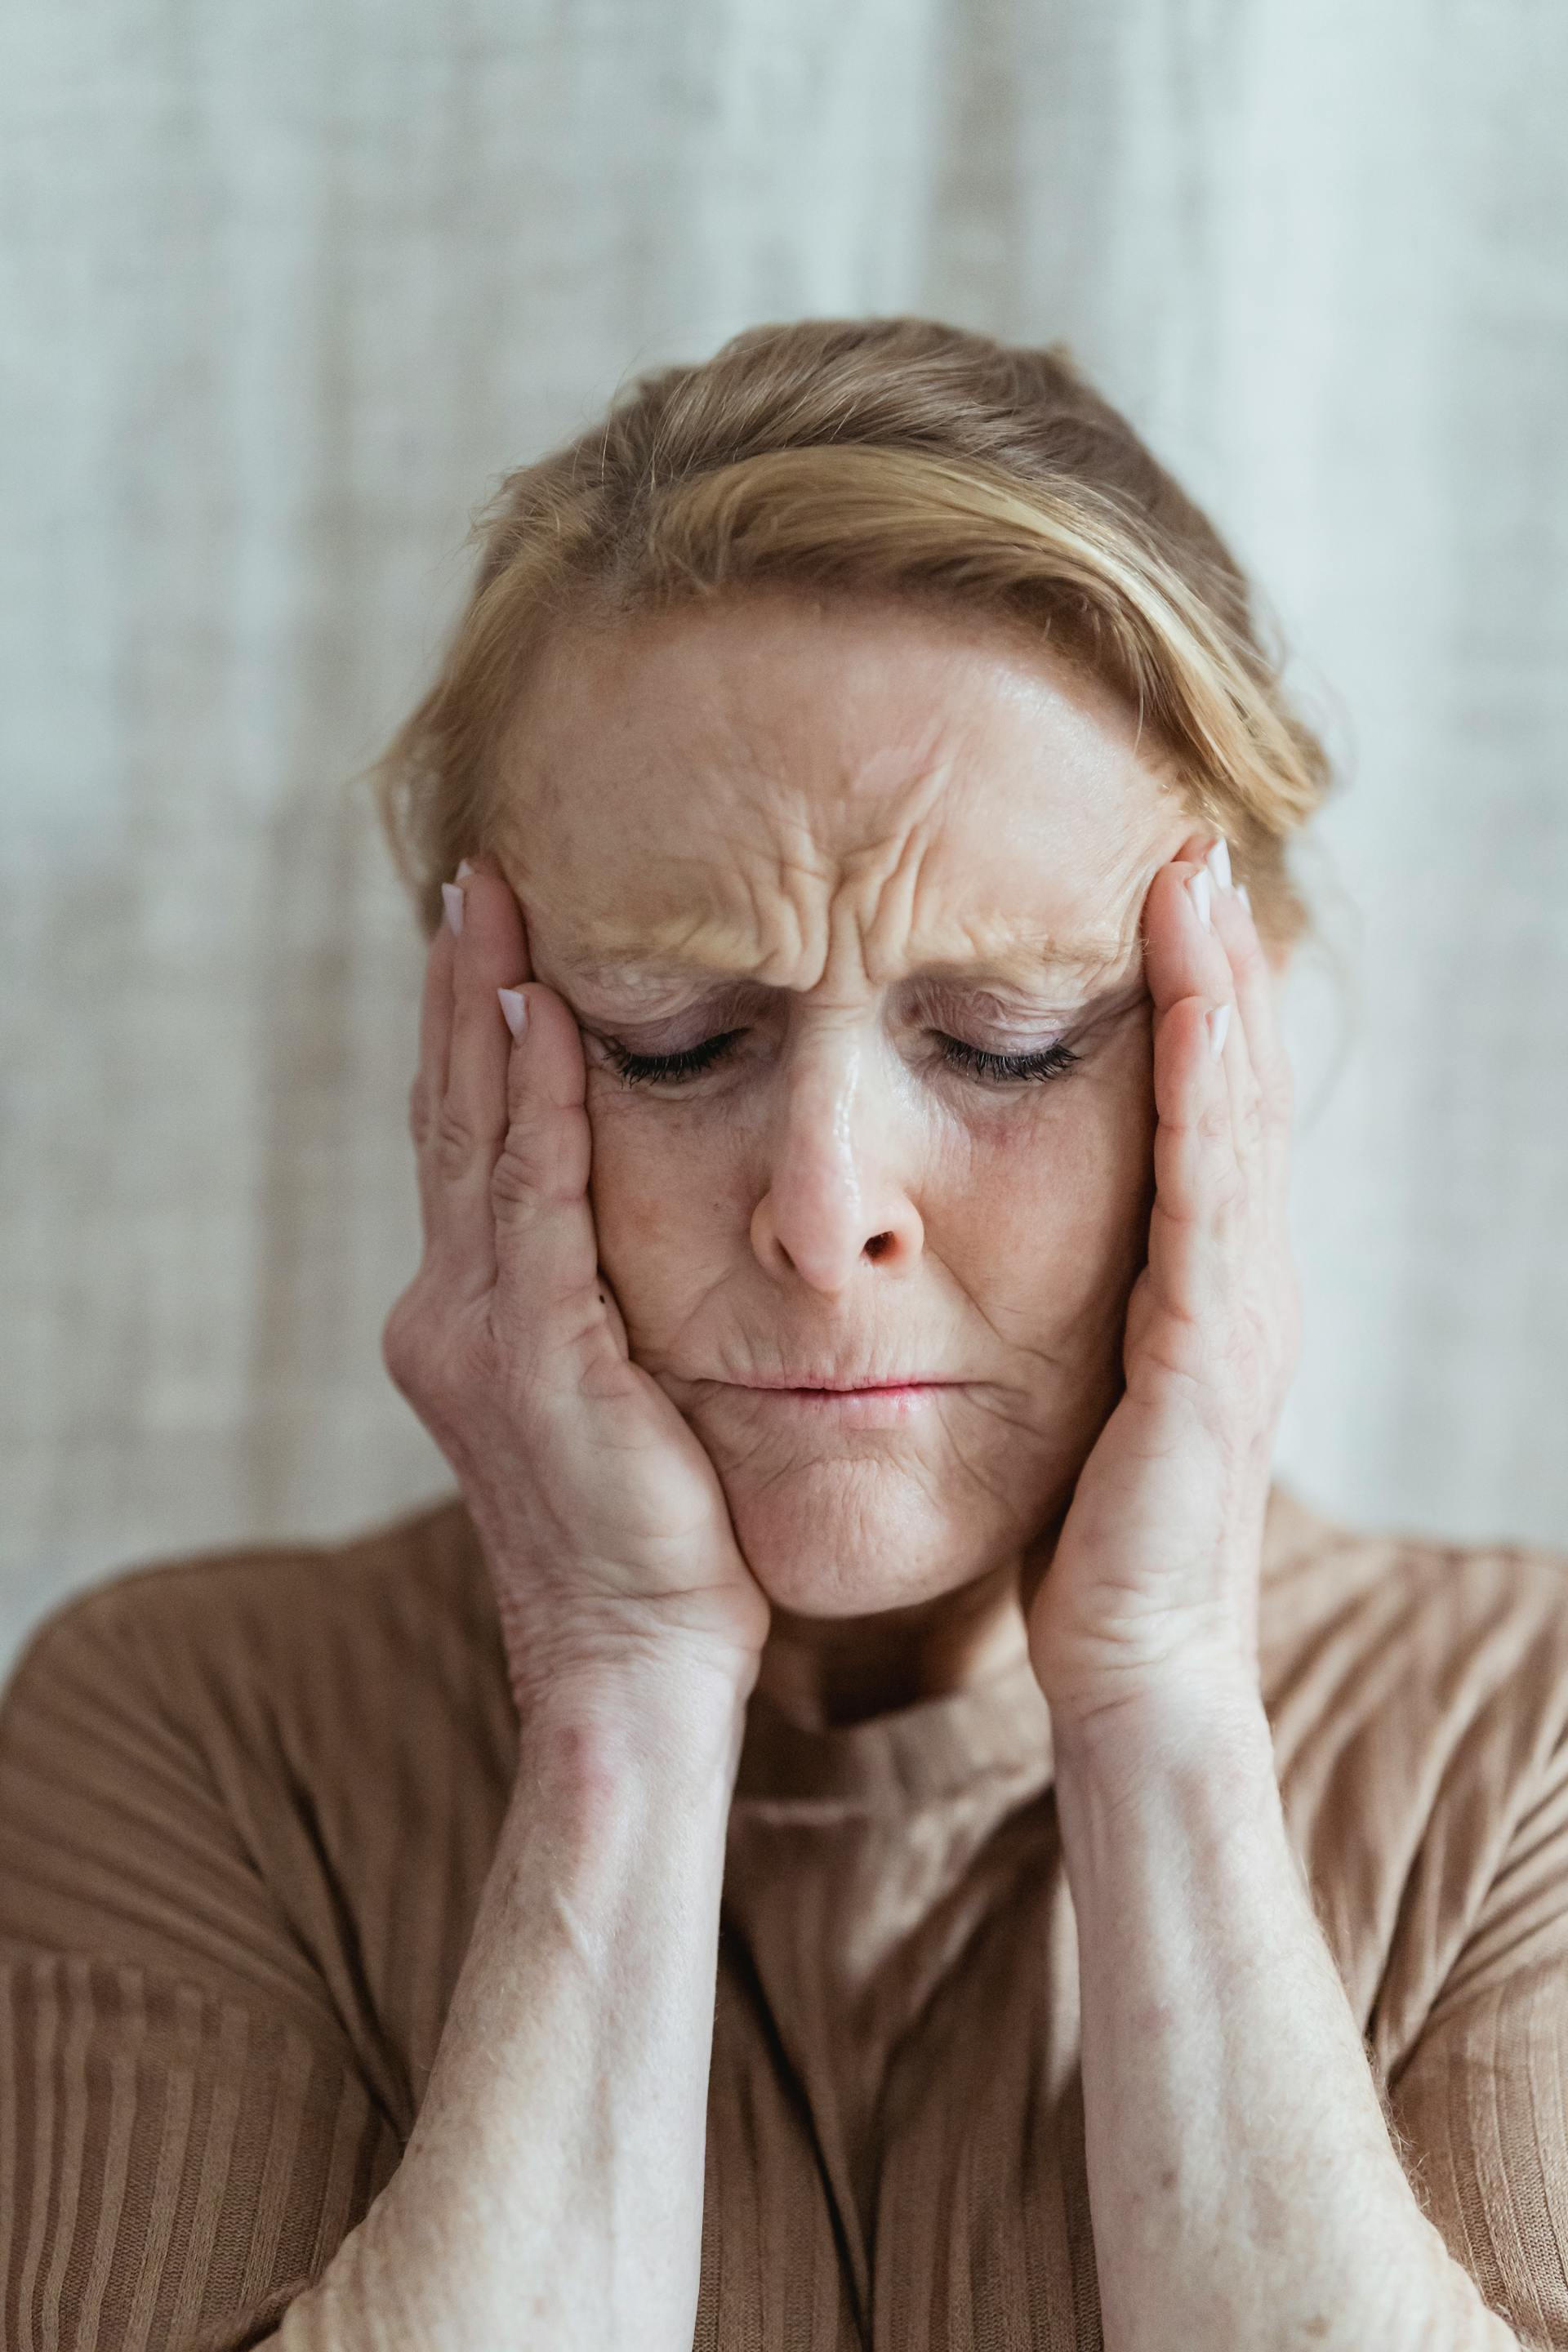 A stressed mature woman | Source: Pexels